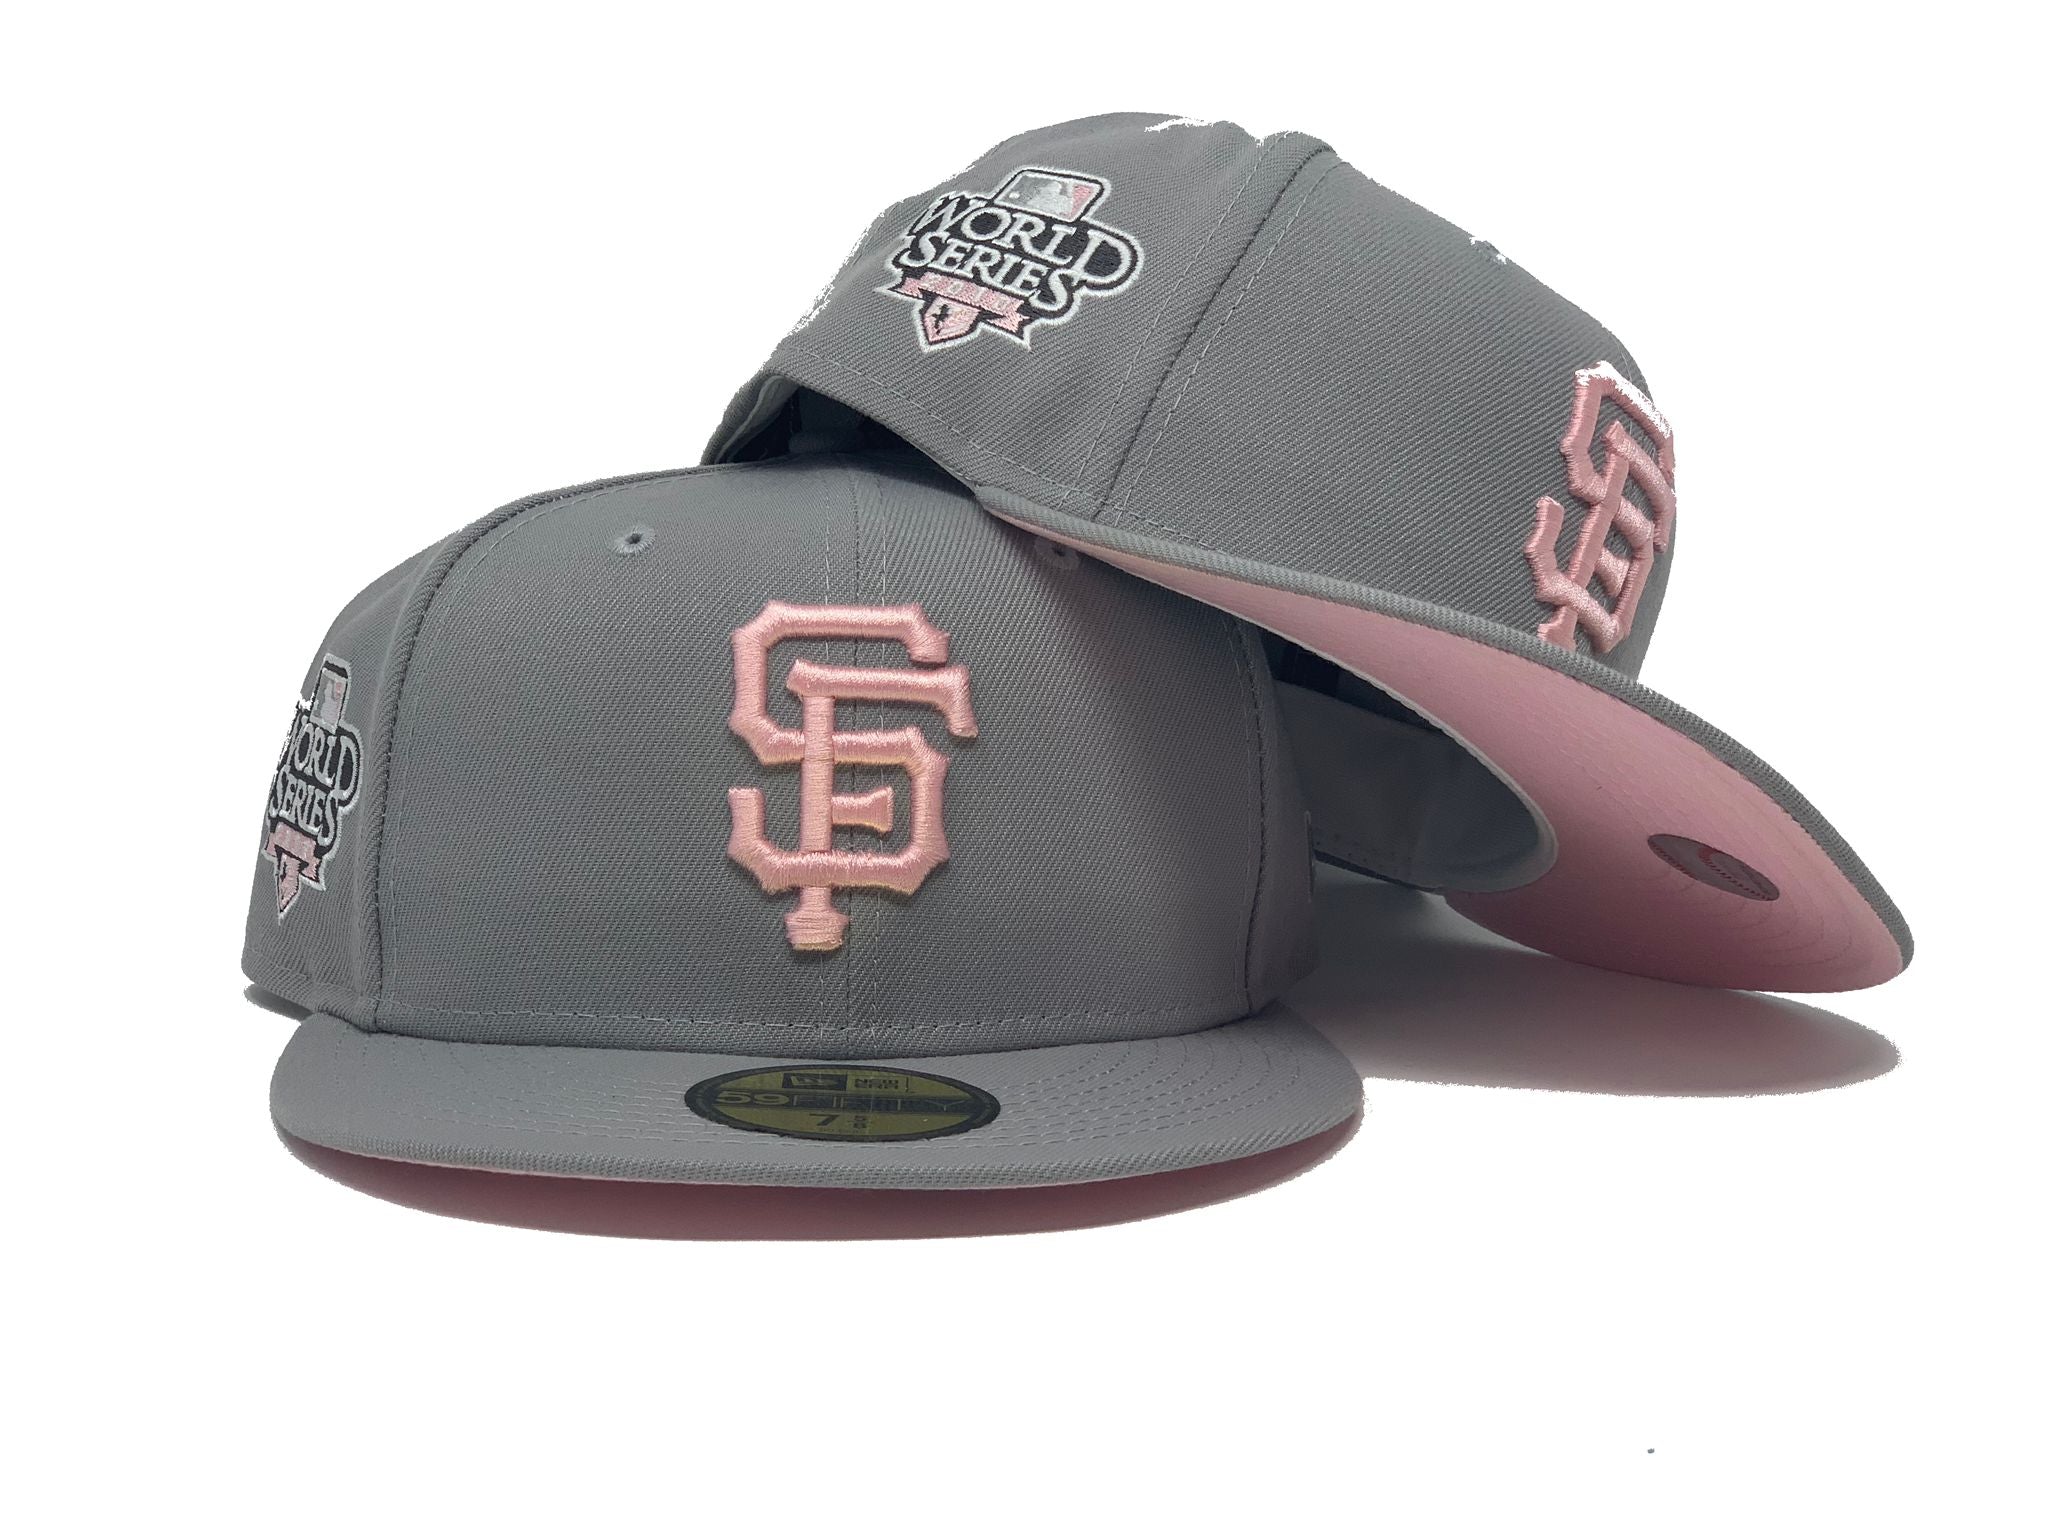 SAN FRANCISCO GIANTS CITY CONNECT CIRCUIT BOARD INSPIRED NEW ERA